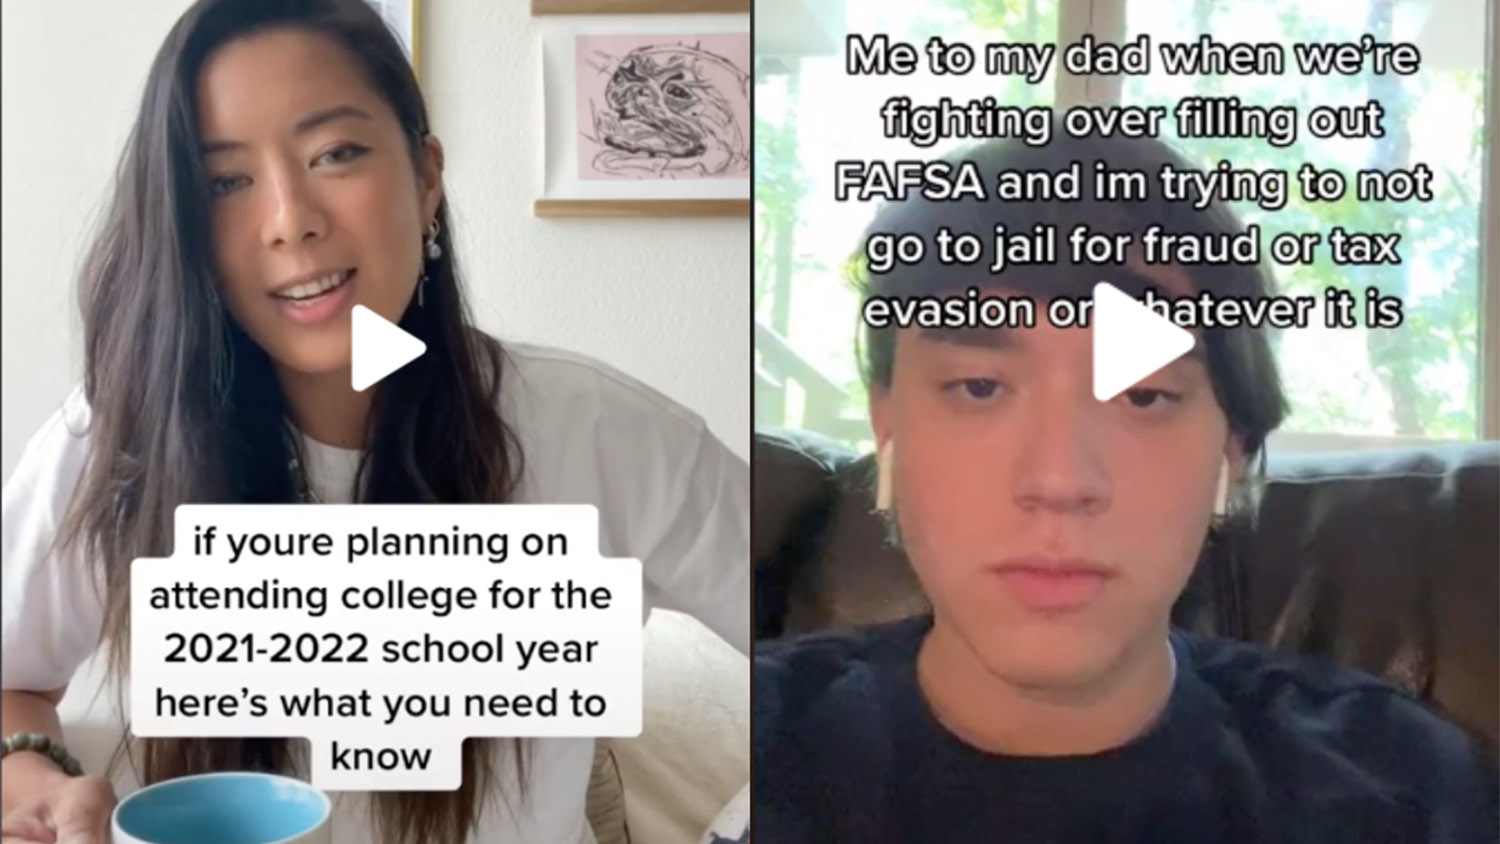 Two TikTok videos side by side commenting on college planning and FAFSA